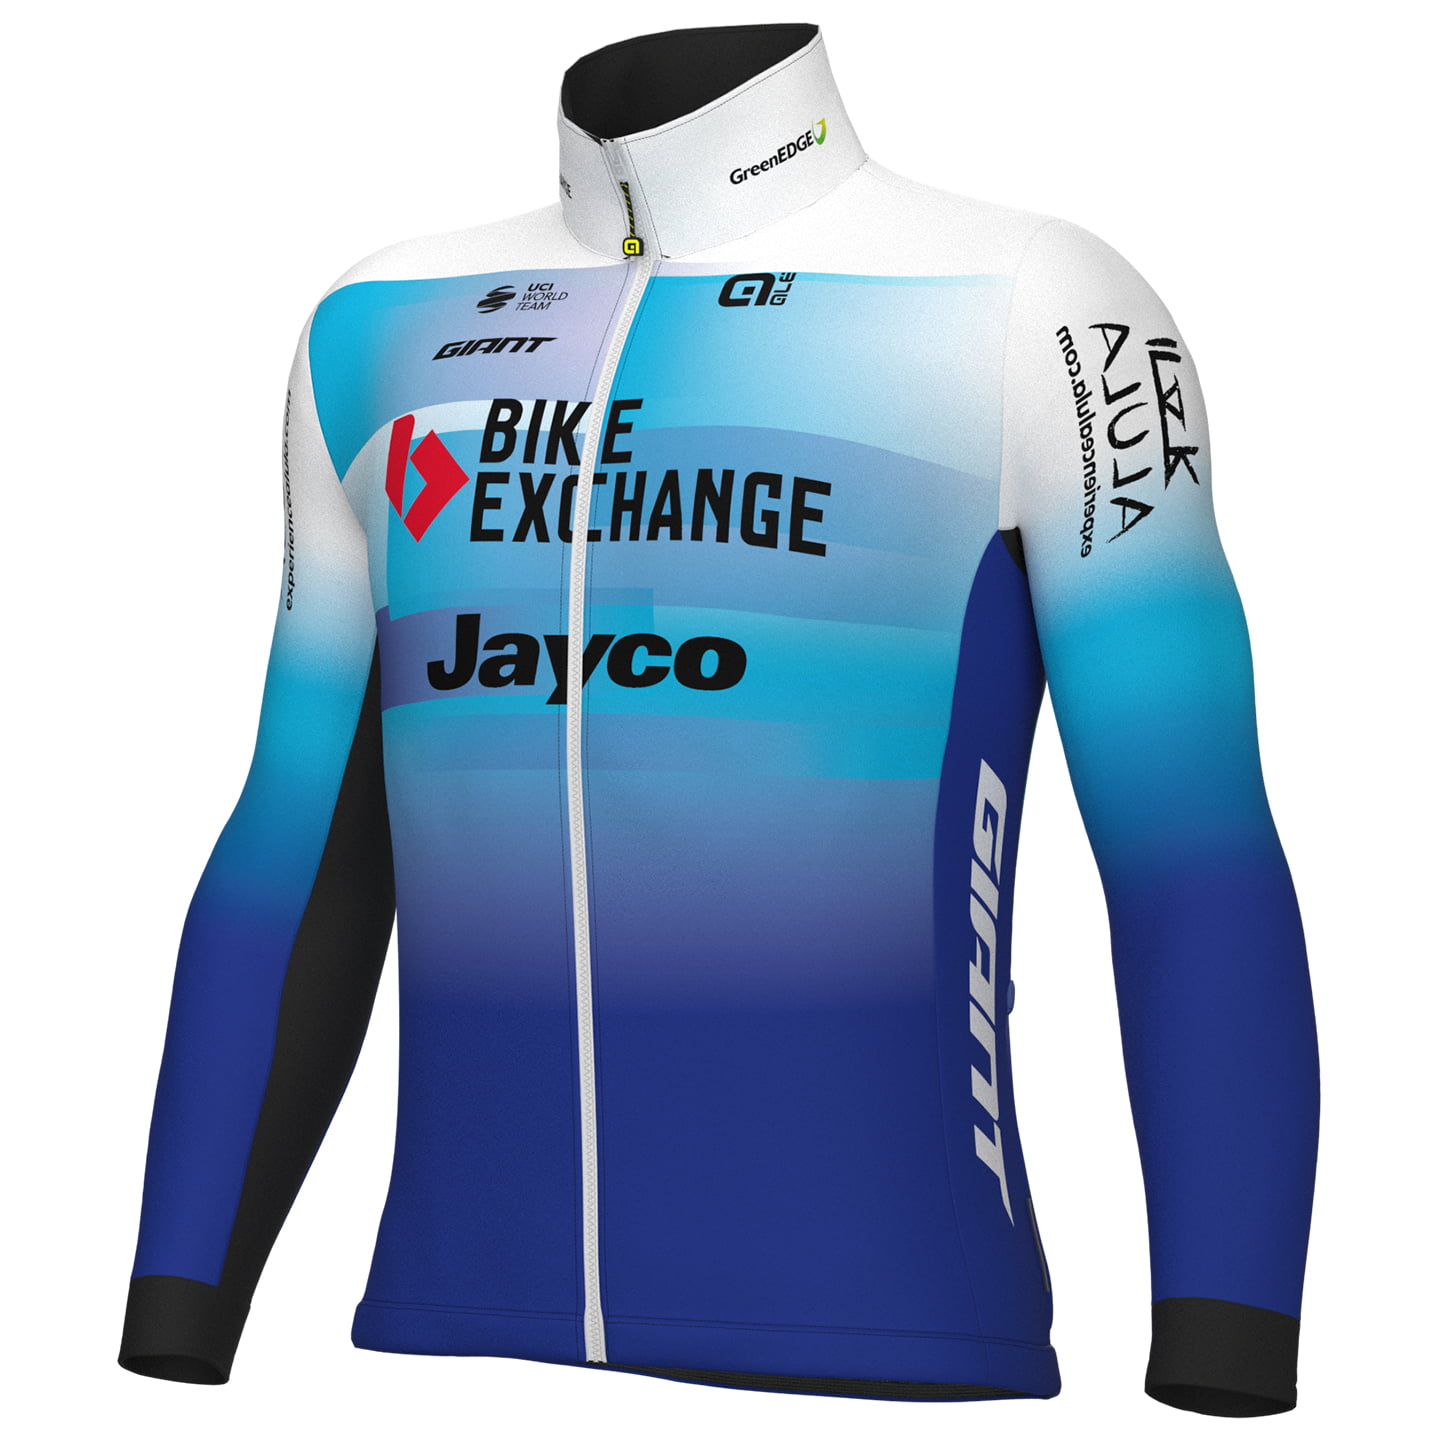 TEAM BIKEEXCHANGE-JAYCO 2022 Thermal Jacket, for men, size S, Winter jacket, Cycling clothing